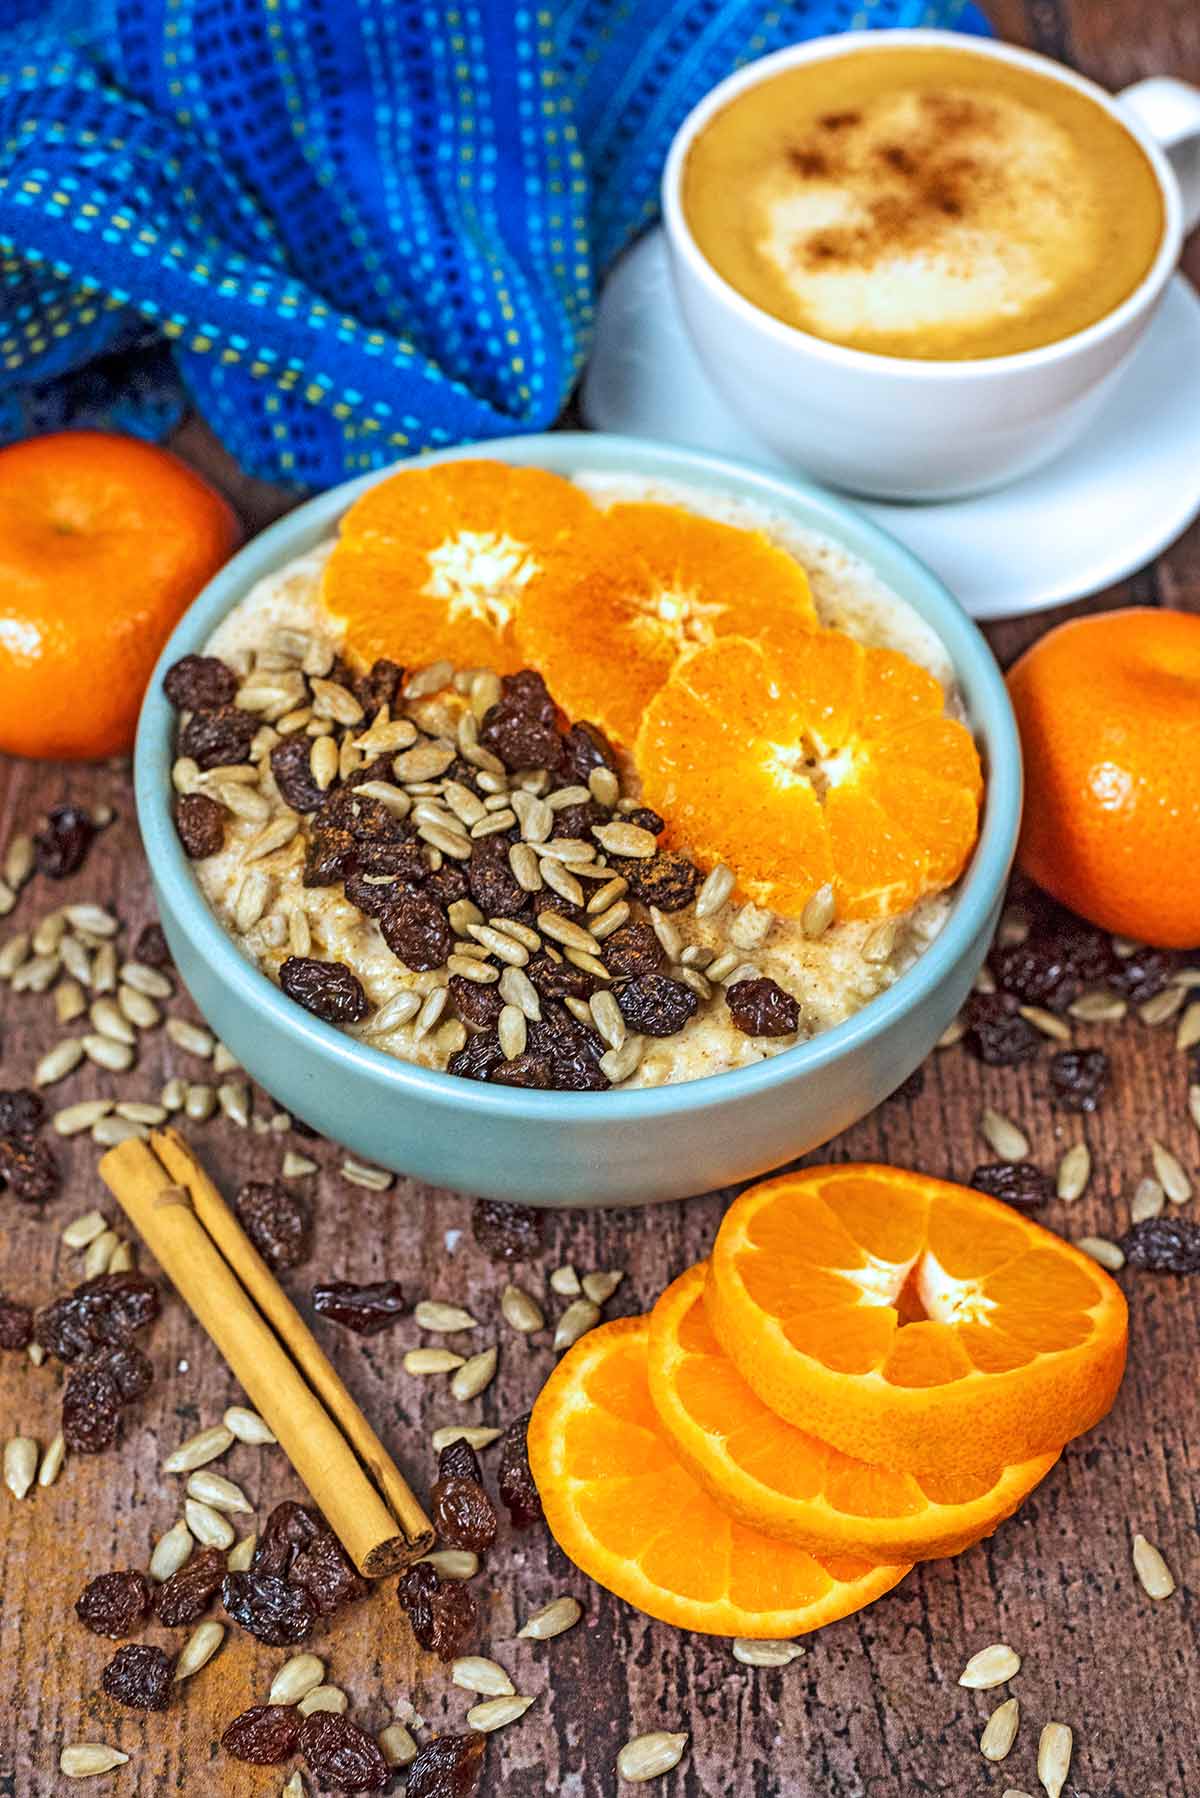 A bowl of oats topped with orange spices in front of a blue towel.